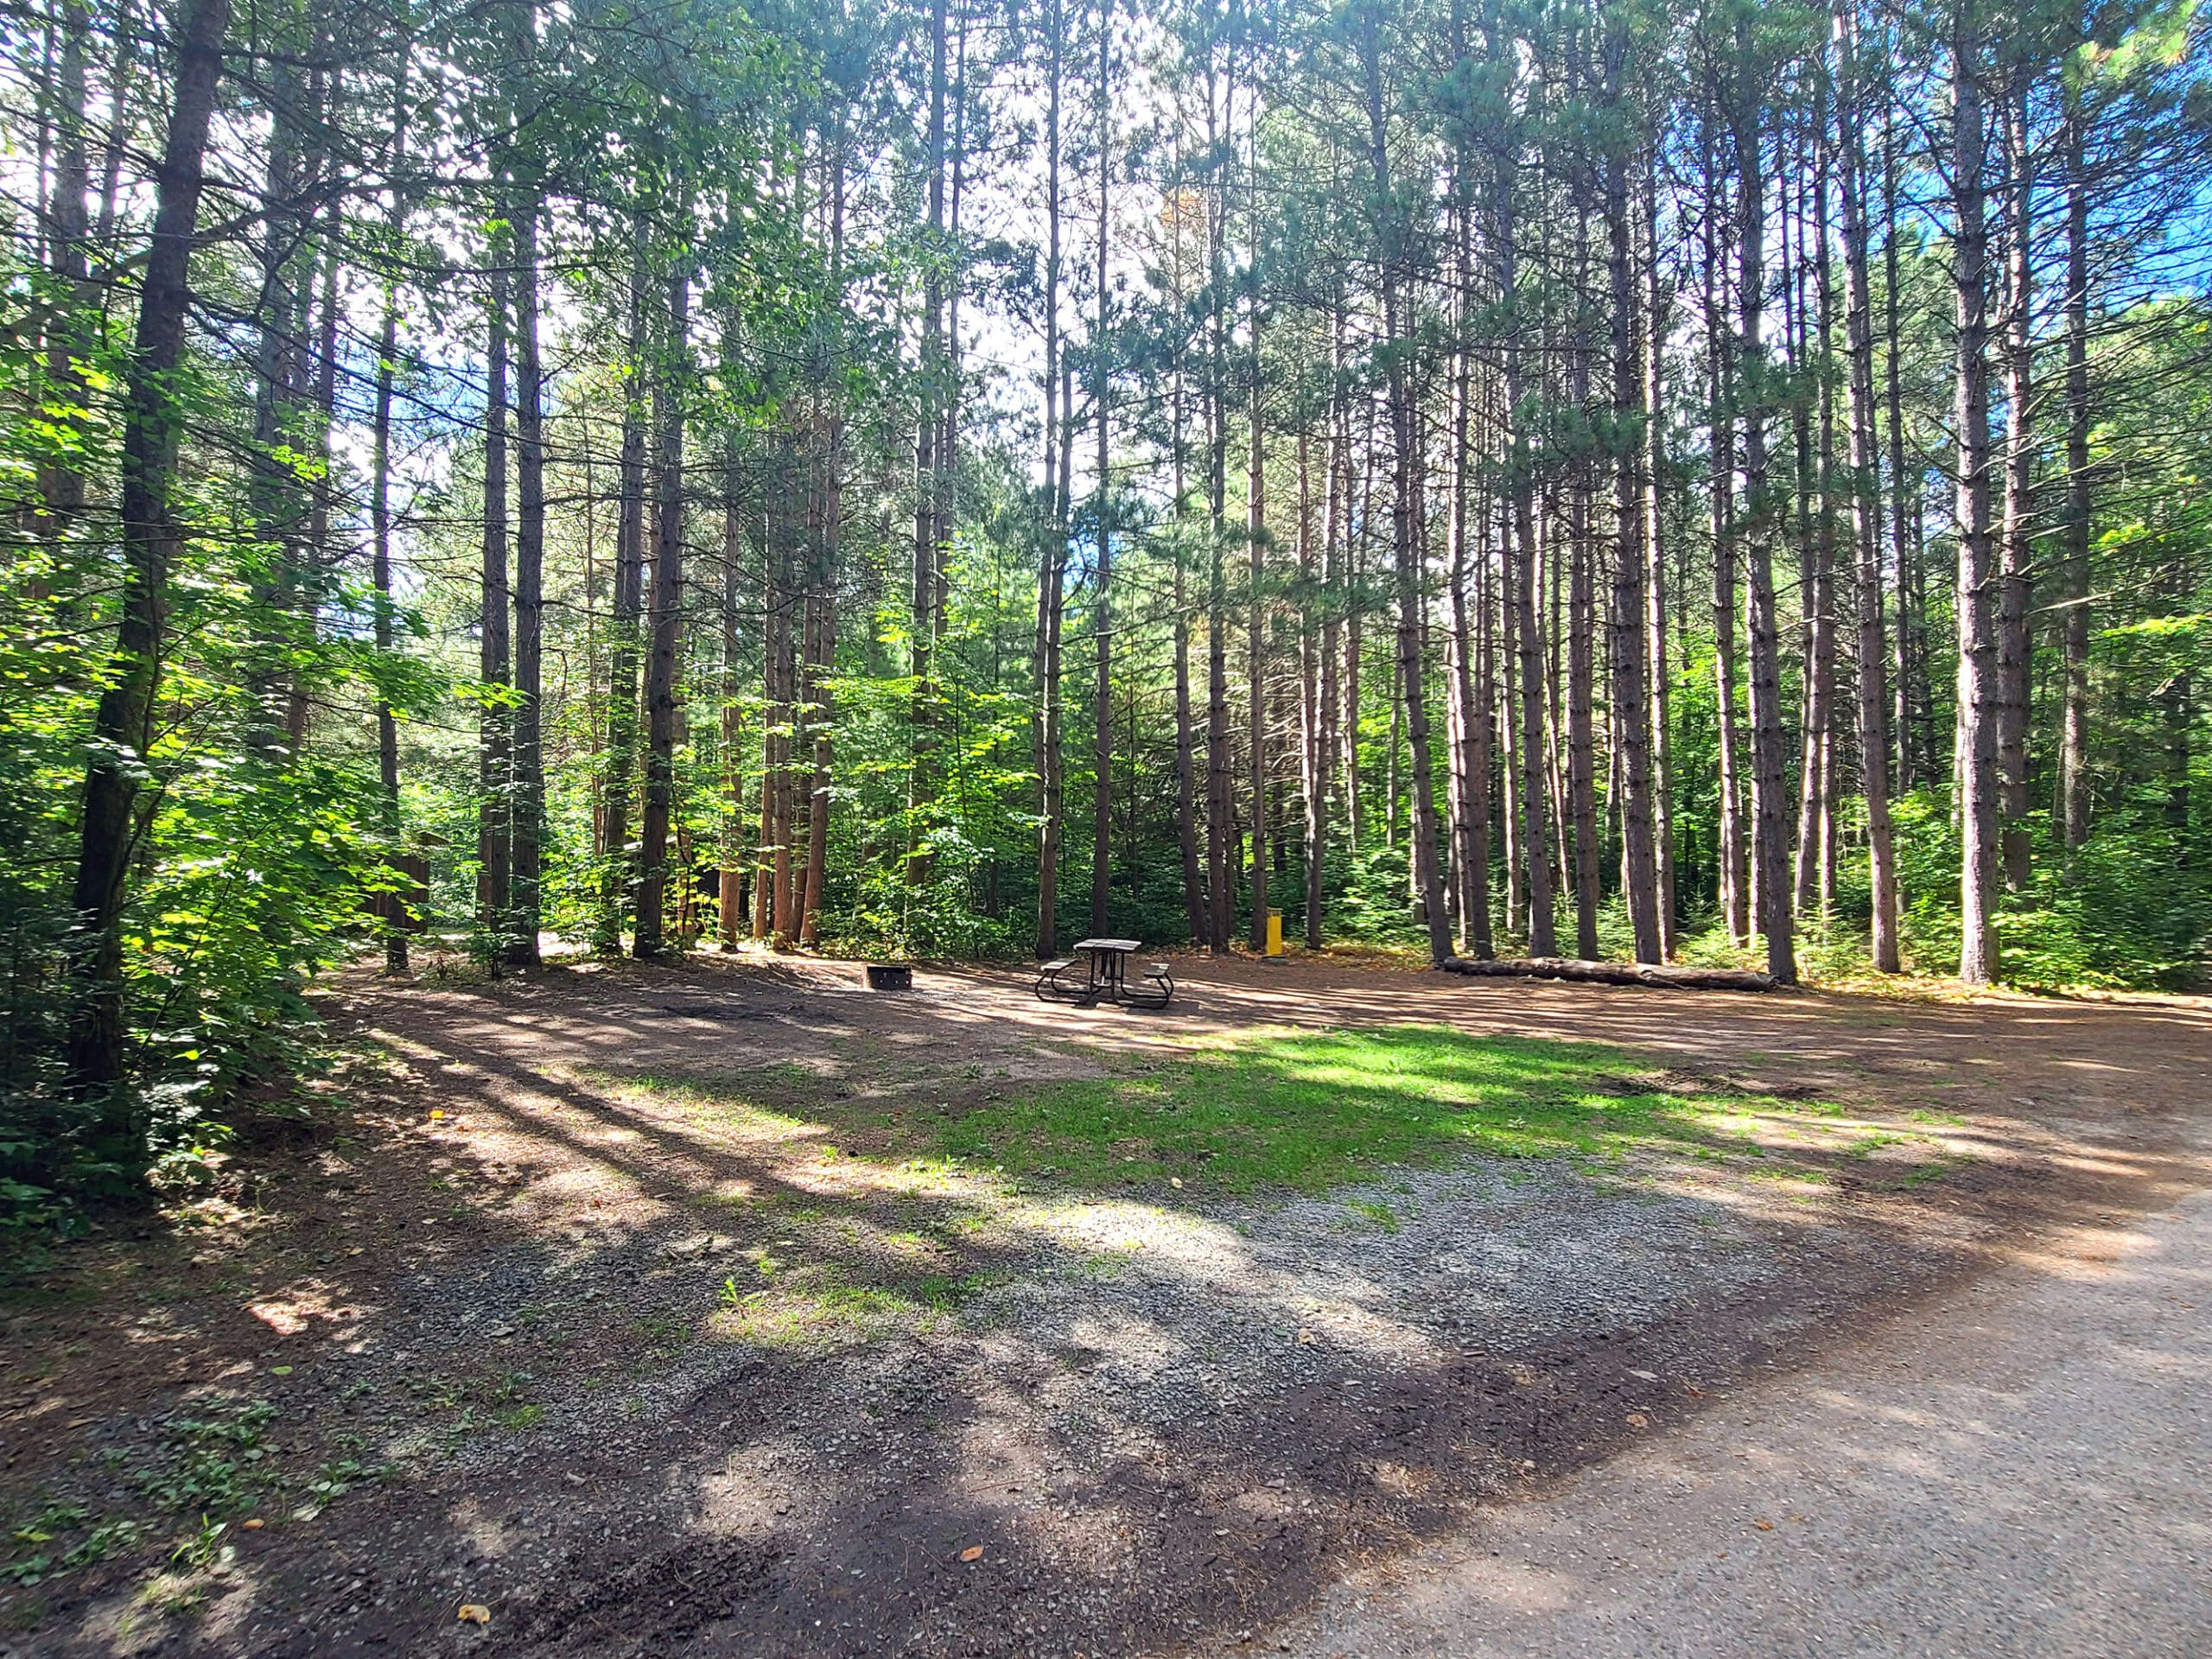 A large, open campsite surrounded by tall pine trees.